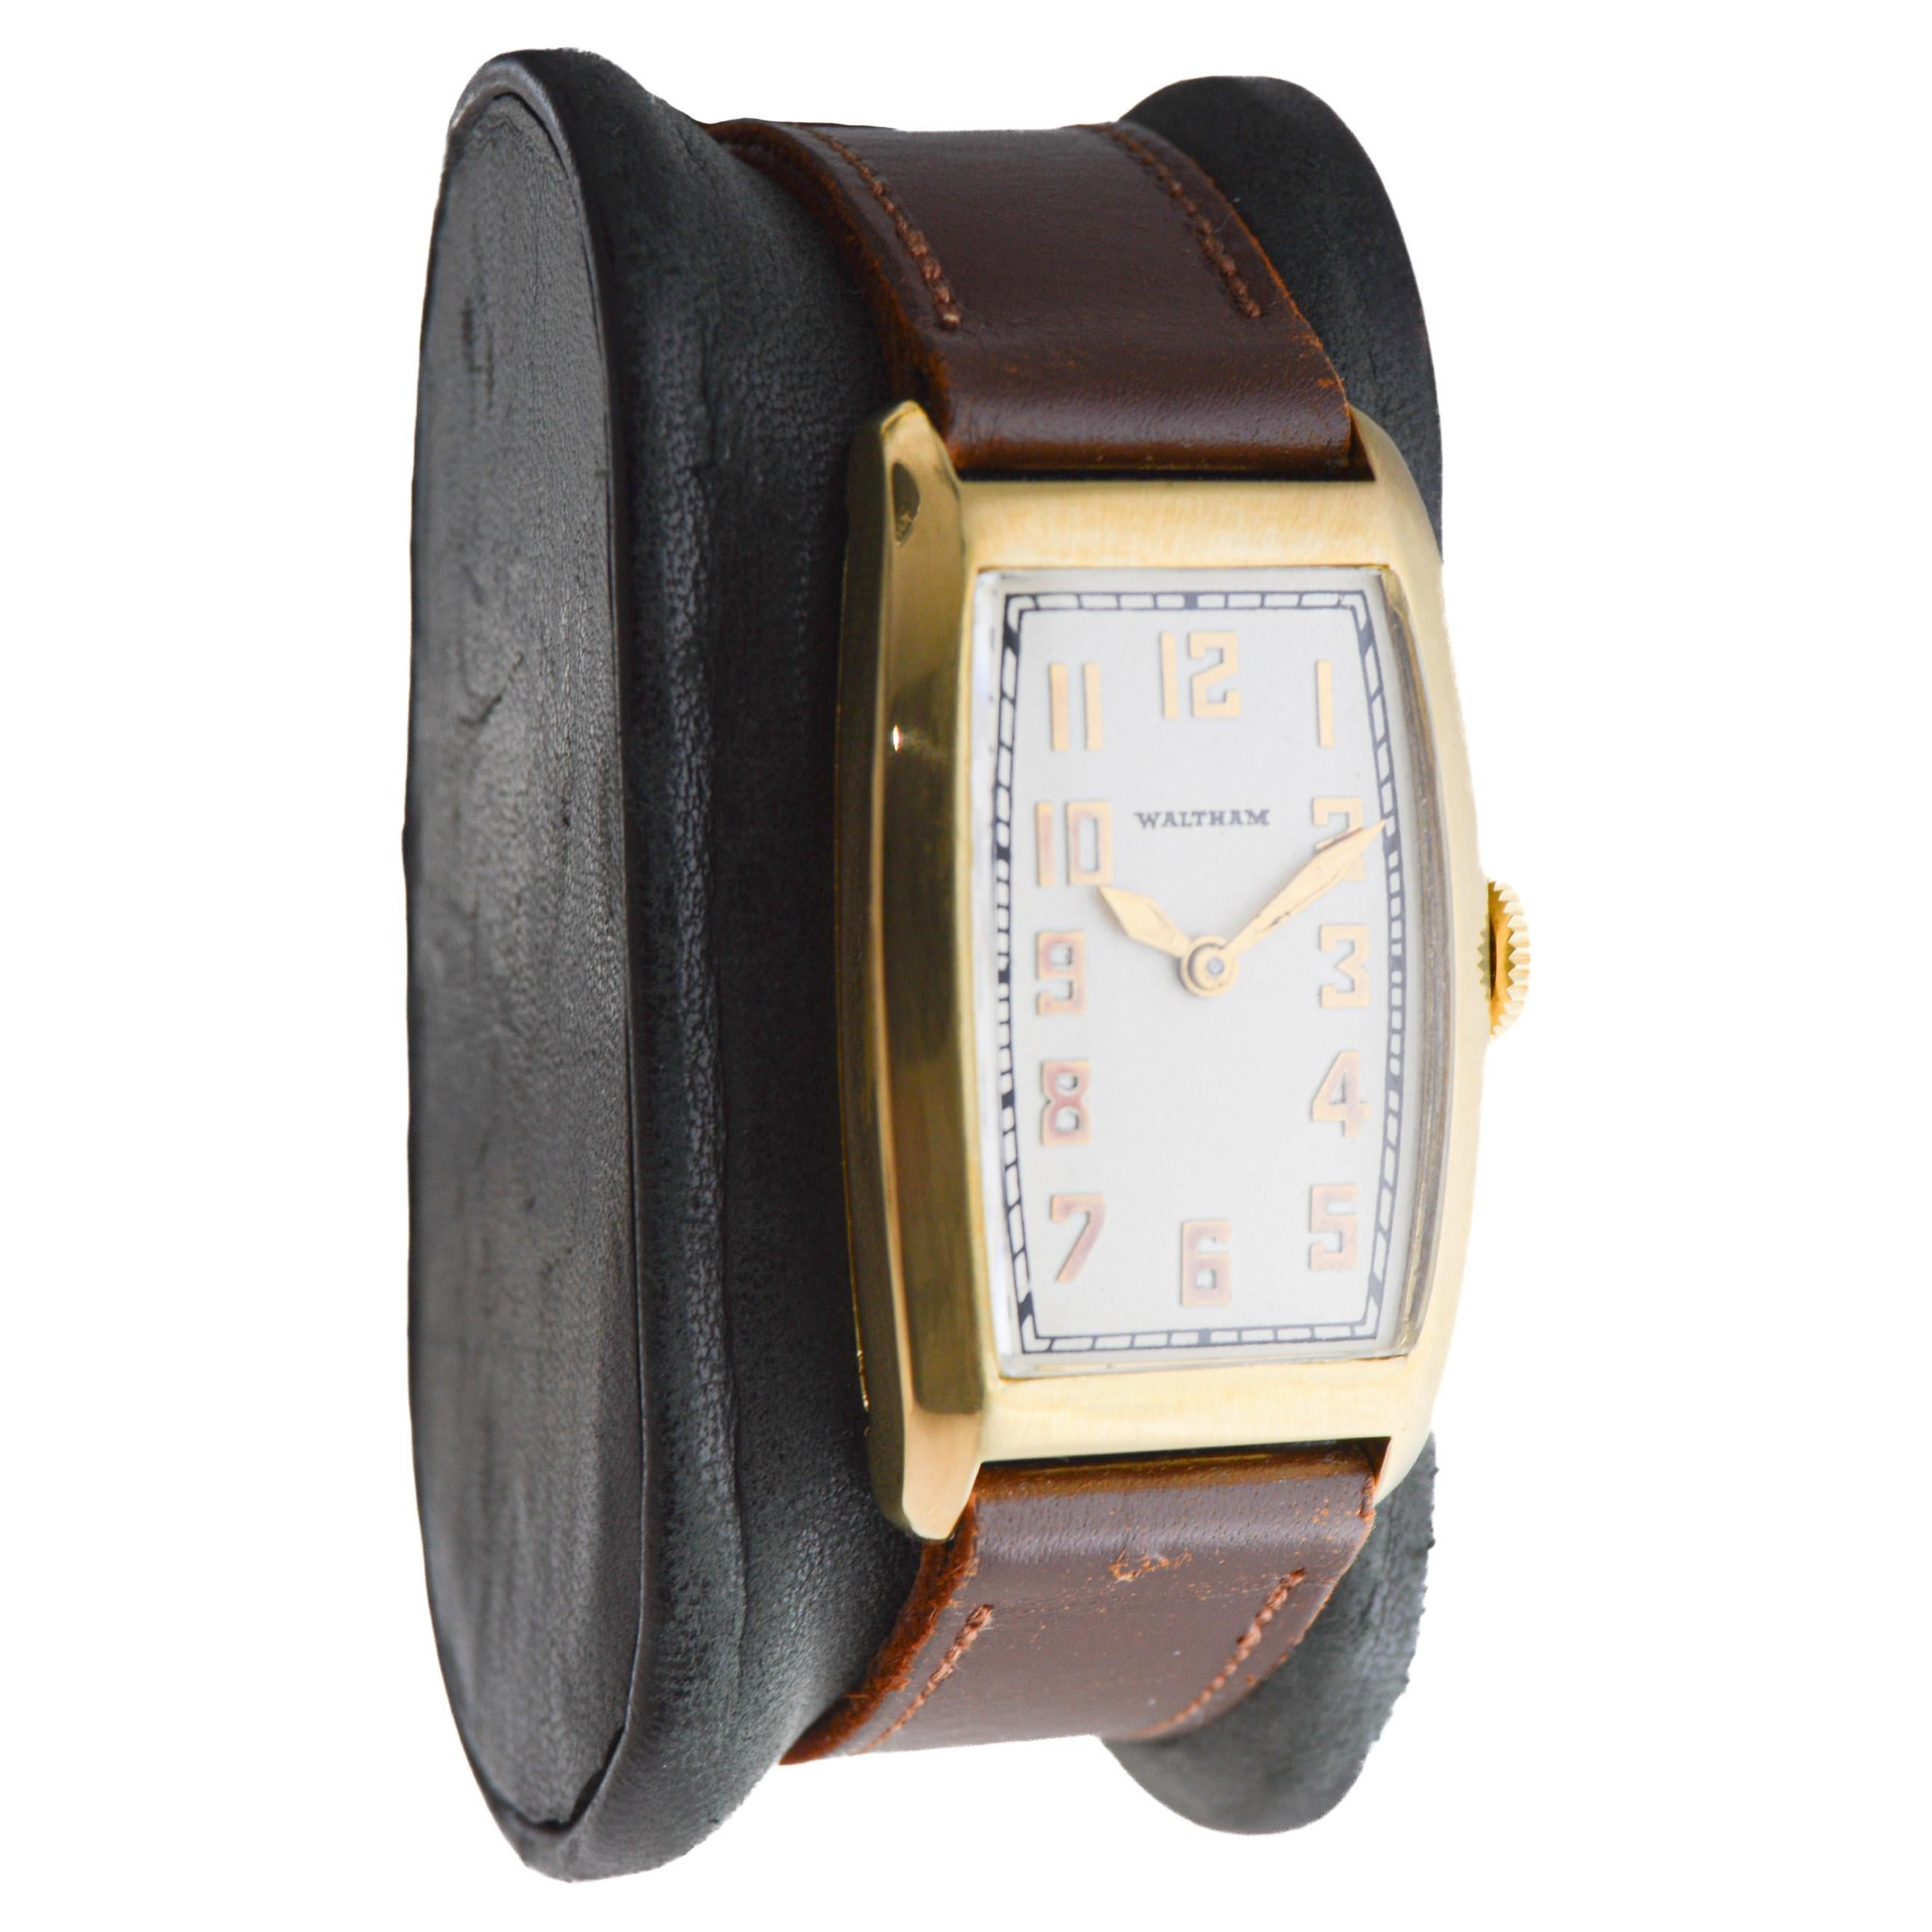 FACTORY / HOUSE: Waltham Watch Company
STYLE / REFERENCE: Art deco / Tonneau Shape
METAL / MATERIAL: Gold Filled
CIRCA / YEAR: 1934
DIMENSIONS / SIZE: Length 41mm X Width 24mm
MOVEMENT / CALIBER: Manual Winding / 17 Jewels / Caliber 
DIAL / HANDS: